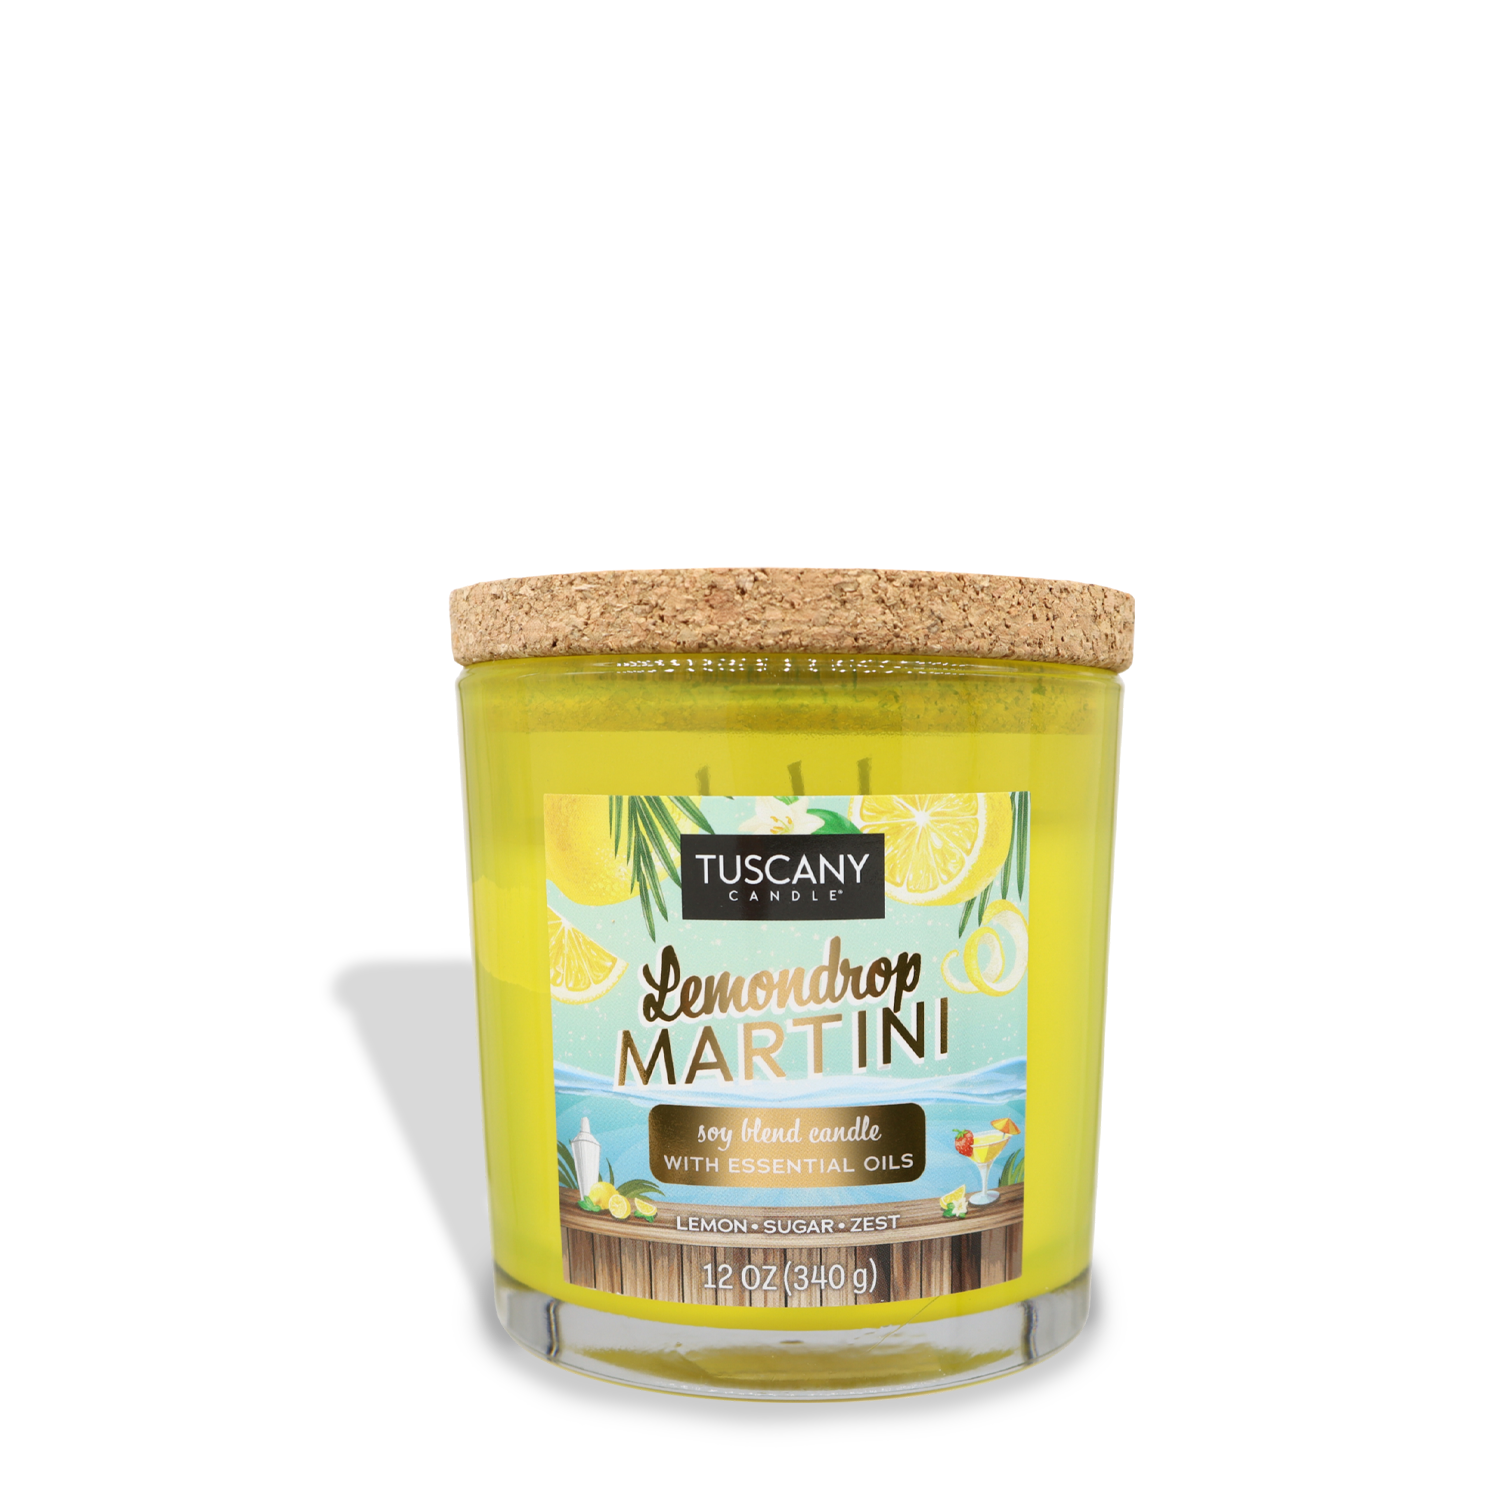 Yellow candle in a clear glass jar with a cork lid labeled "Tuscany Candle® SEASONAL, Lemondrop Martini (12 oz) – Sunset Beach Bar Collection, soy blend candle with essential oils." The 12 oz. scented jar candle features a label adorned with lemons and leaves, evoking the refreshing aroma of lemon zest and sugar.